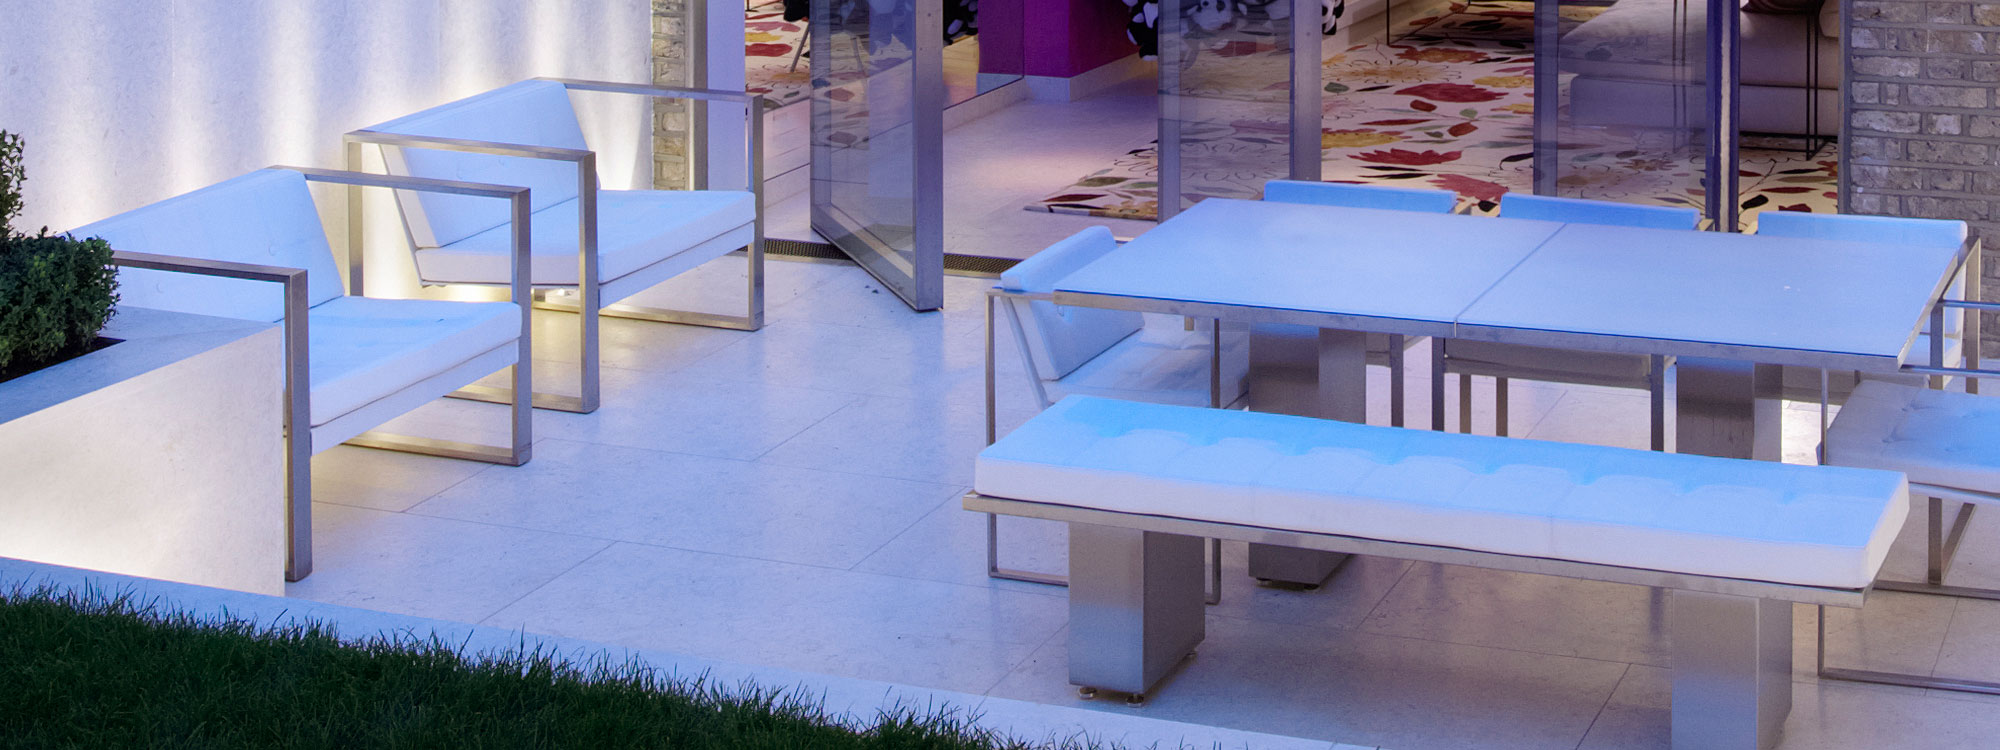 Image of London nighttime terrace, with Poltrona minimalist lounge chairs and Doble pedestal garden table and linear benches by FueraDentro